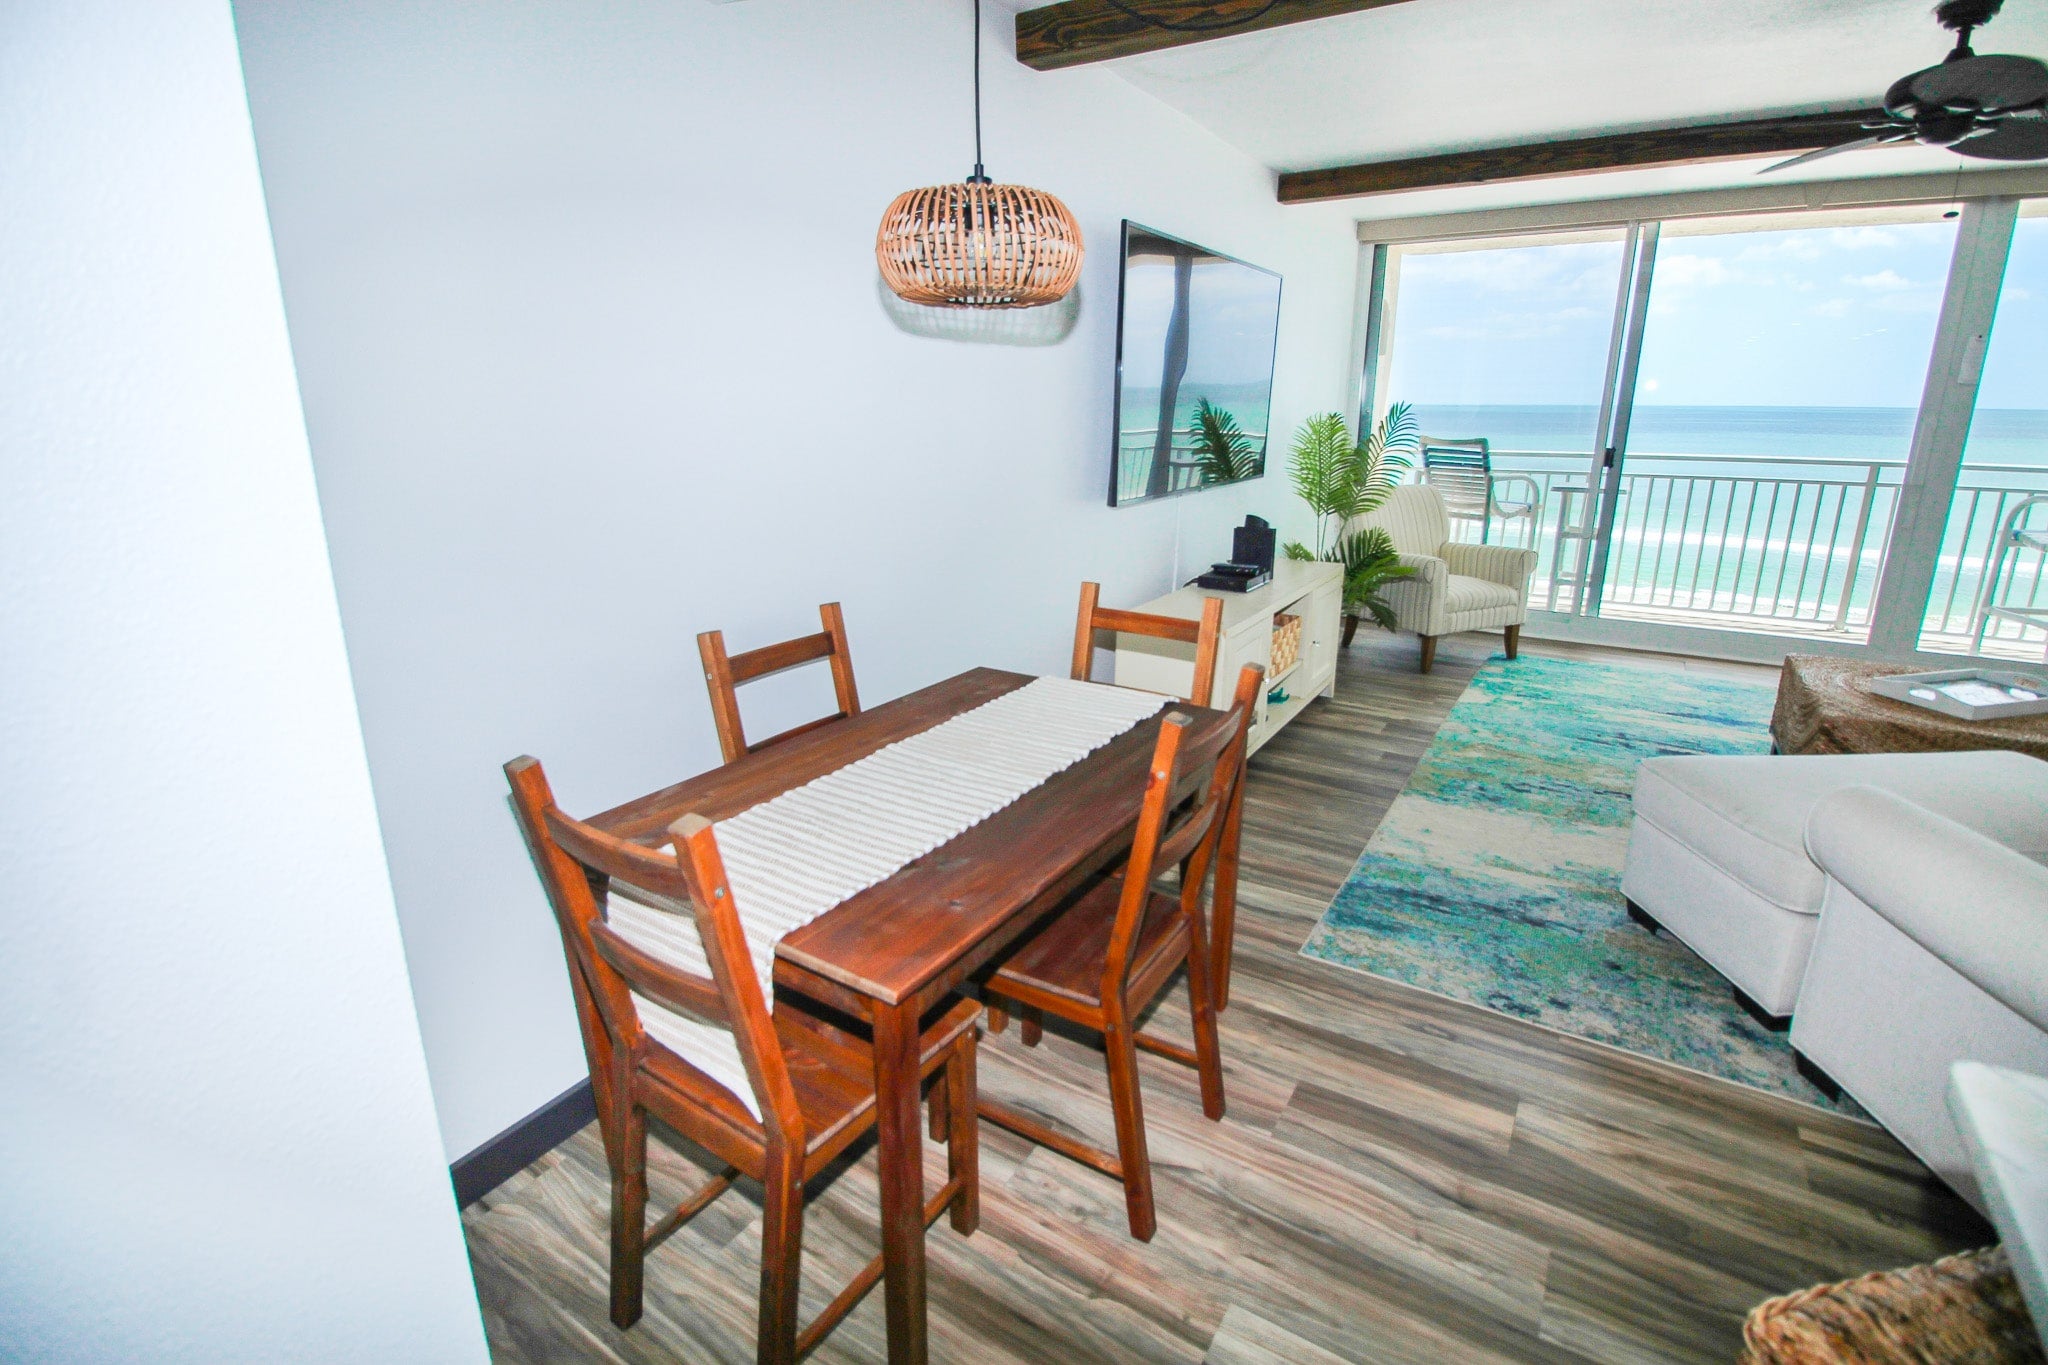 Dining table with ocean view